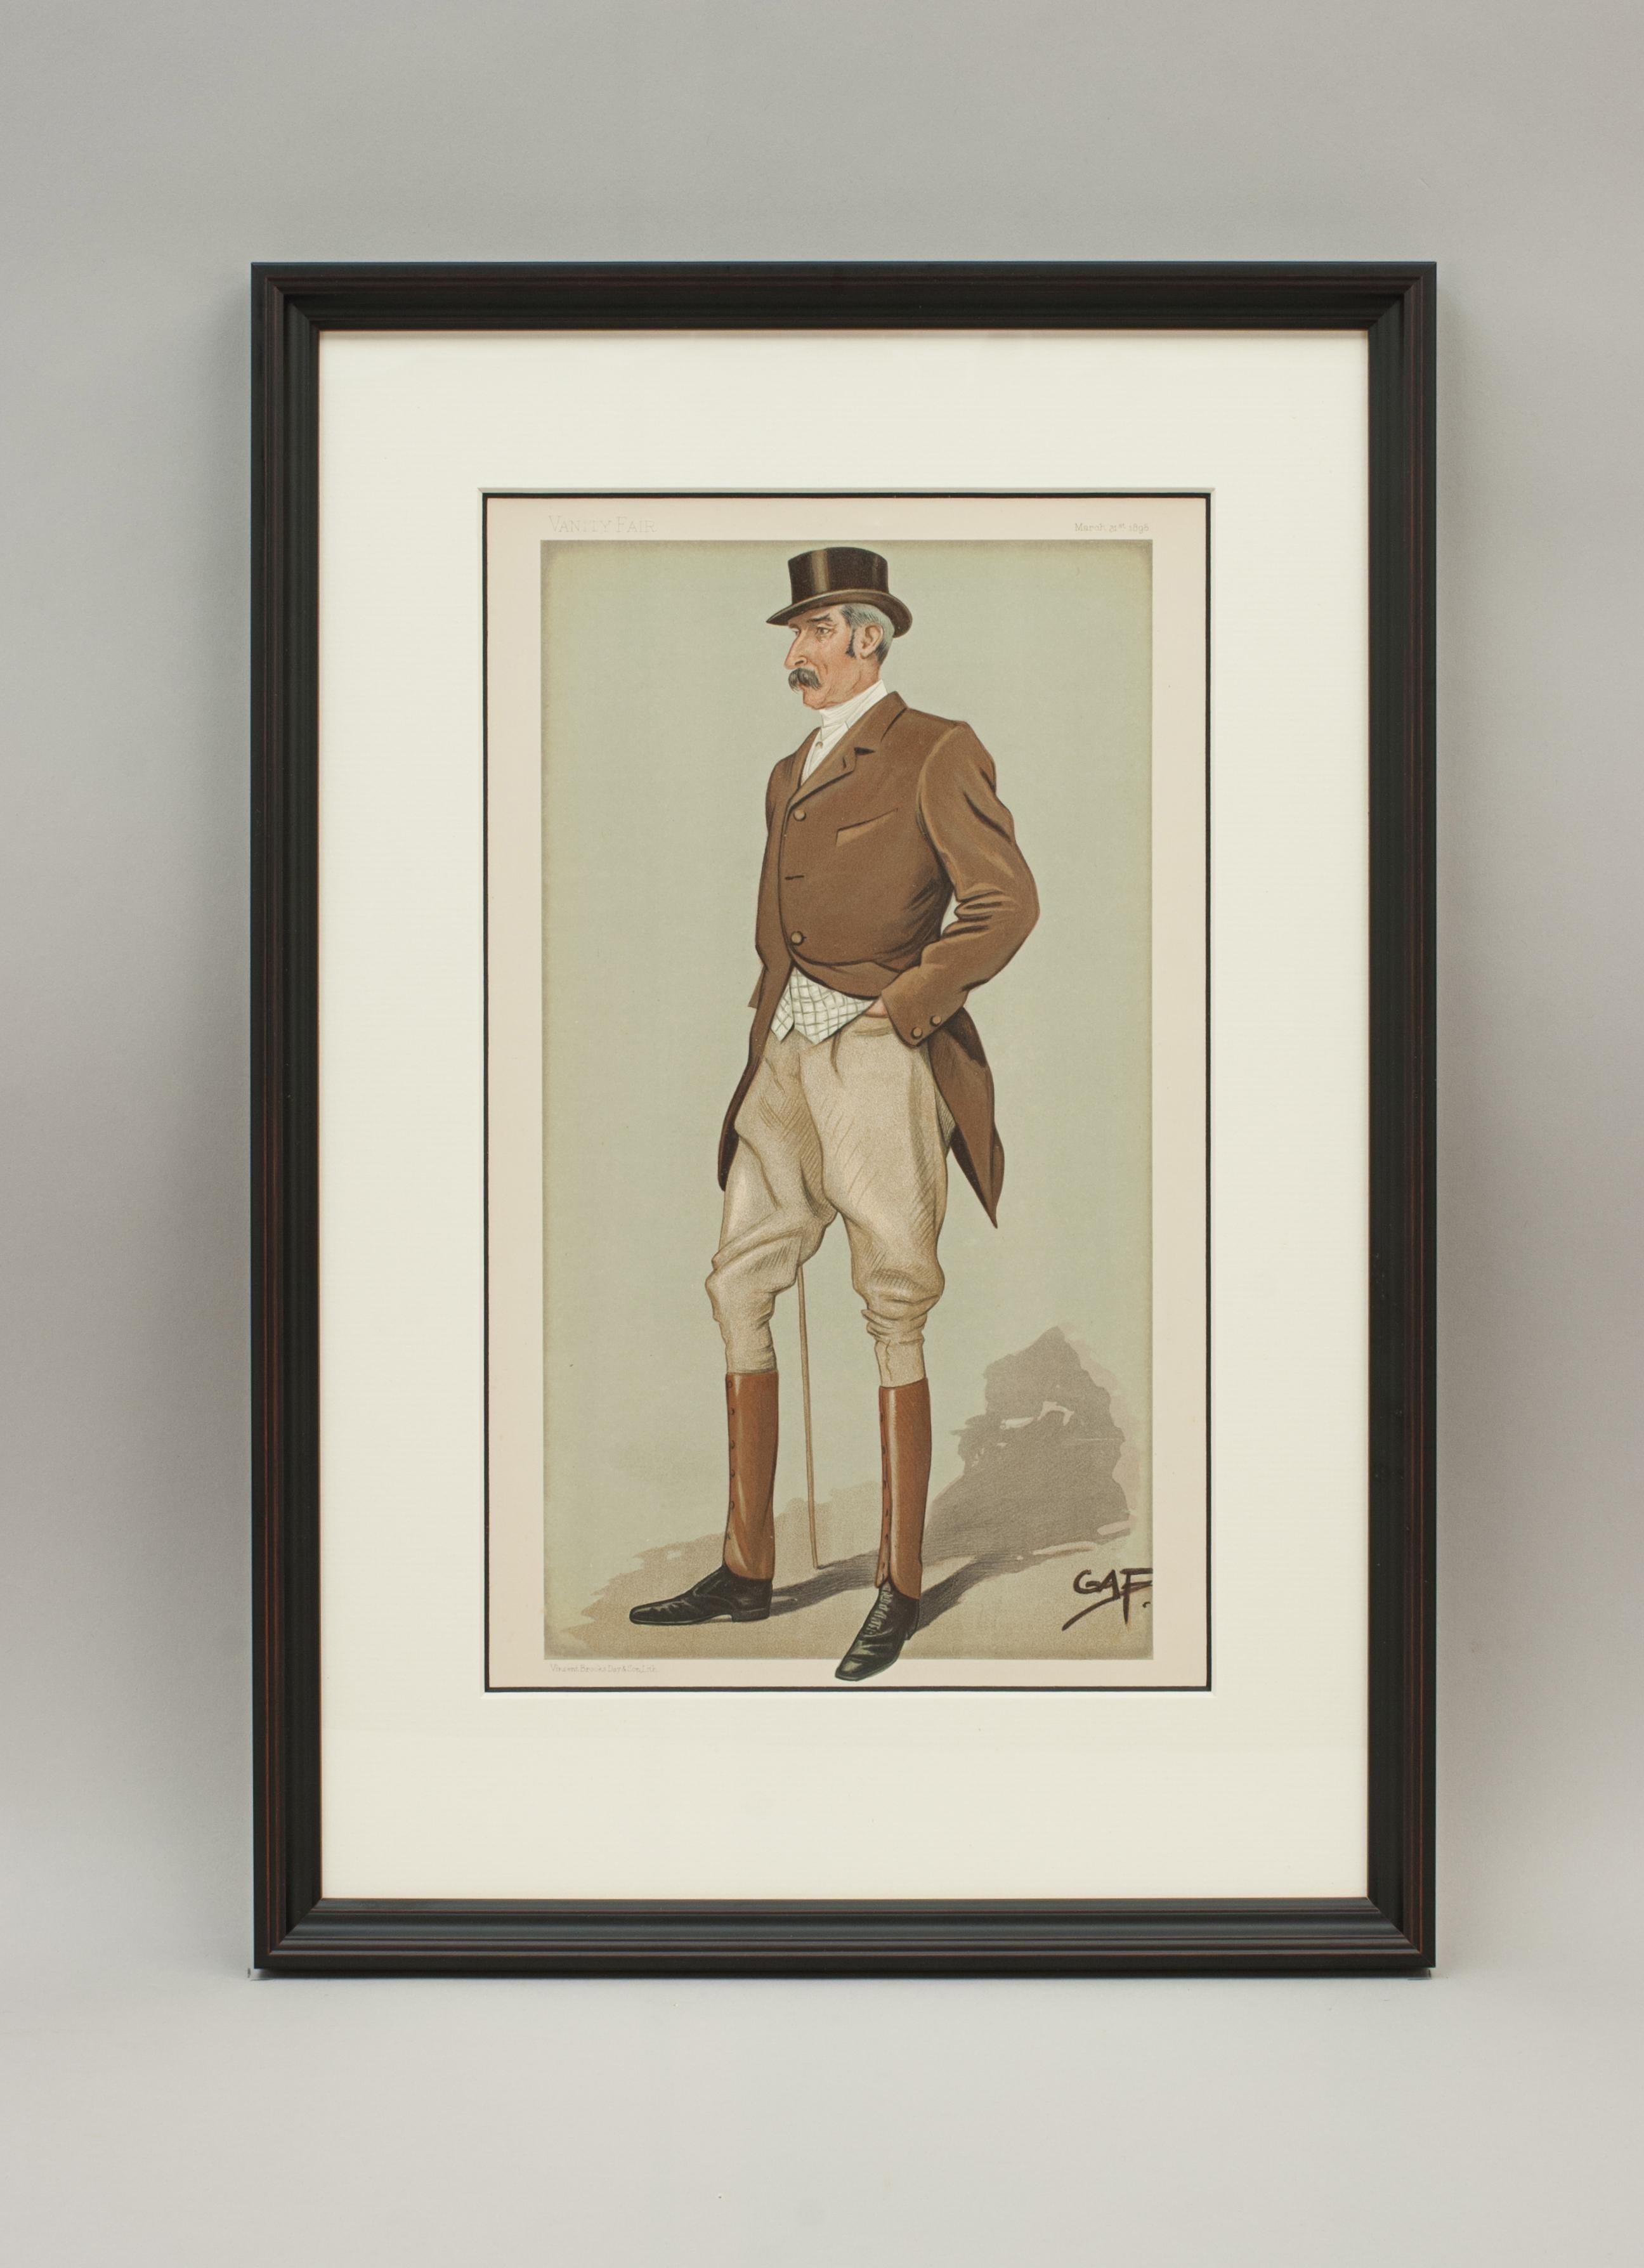 A set of four framed vanity fair equestrian caricature pictures.
A great collection of 'Men of the Day' hunting, equestrian caricatures from 'Vanity Fair' by Spy and GAF. All are framed in new black frames with double mounts. These are a great wall